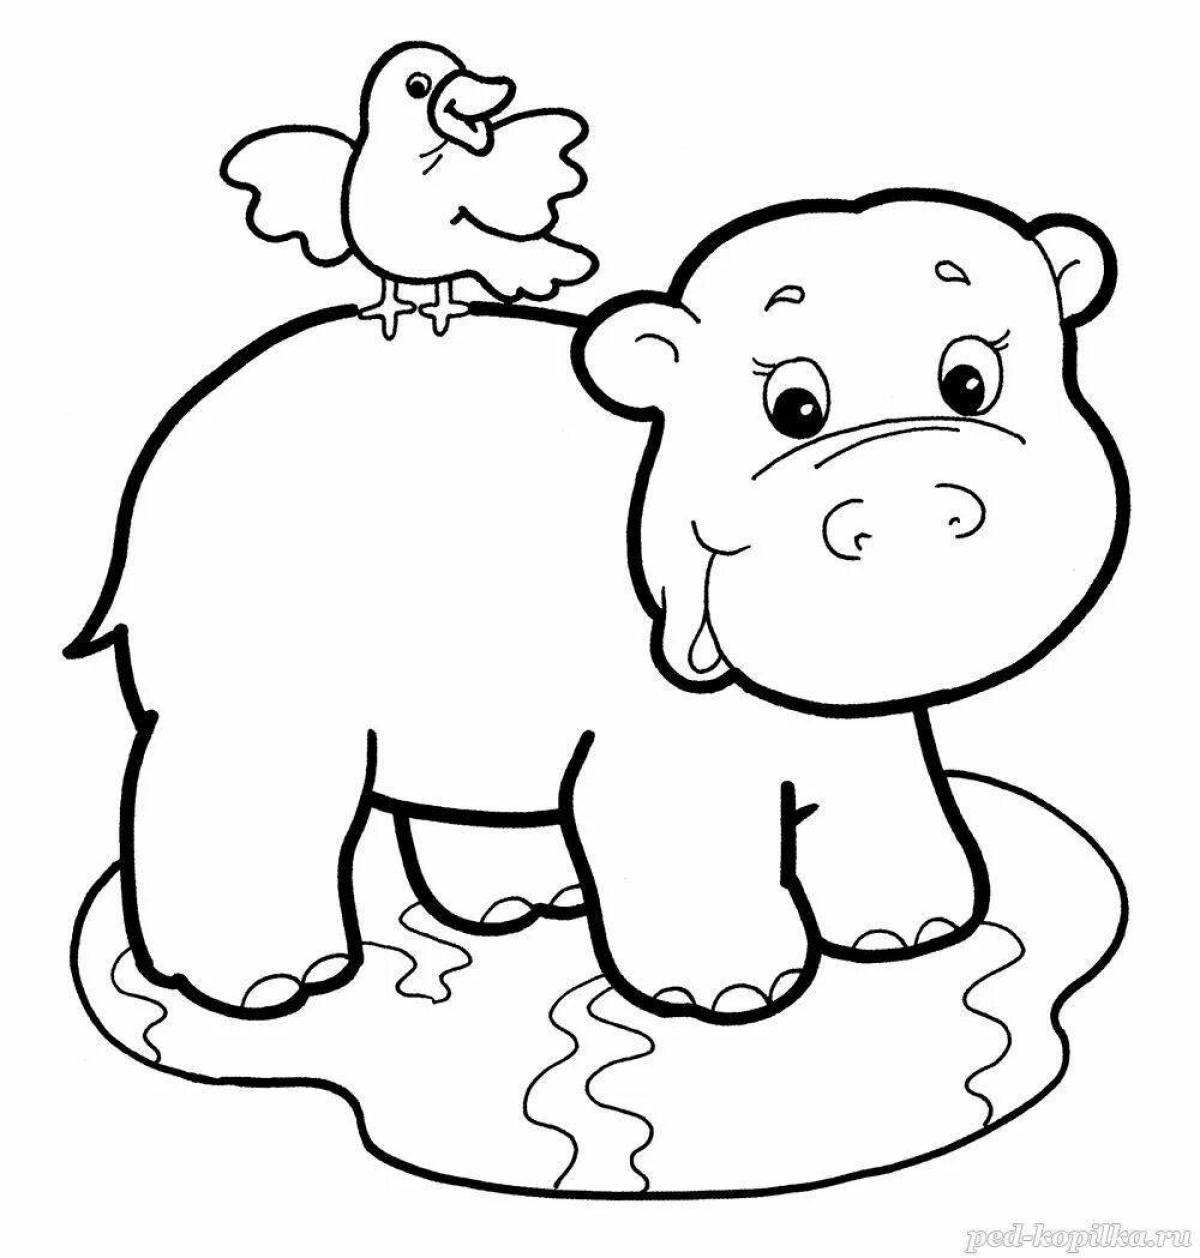 A joyful animal coloring book for toddlers